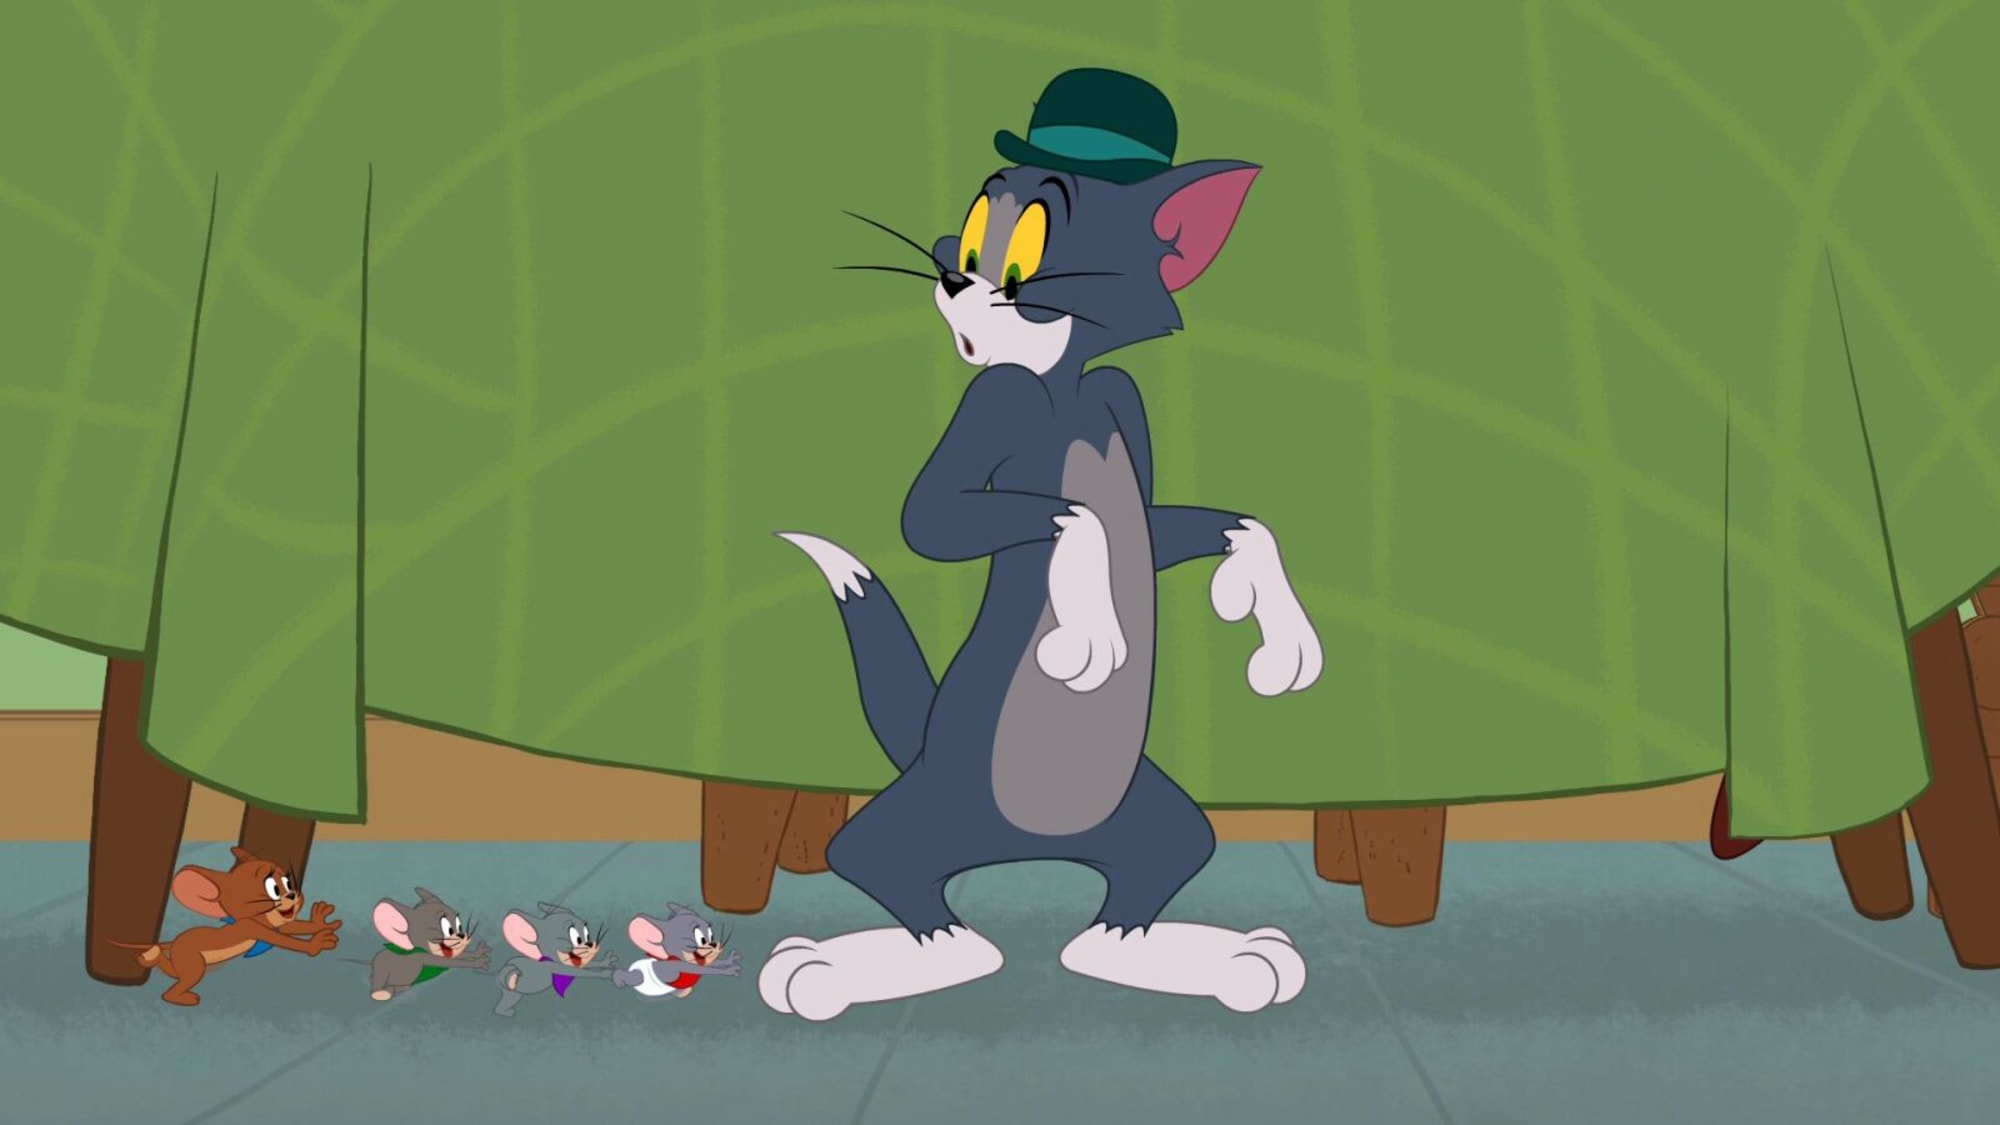 Tom and Jerry Cowboy Up DVD review: What to